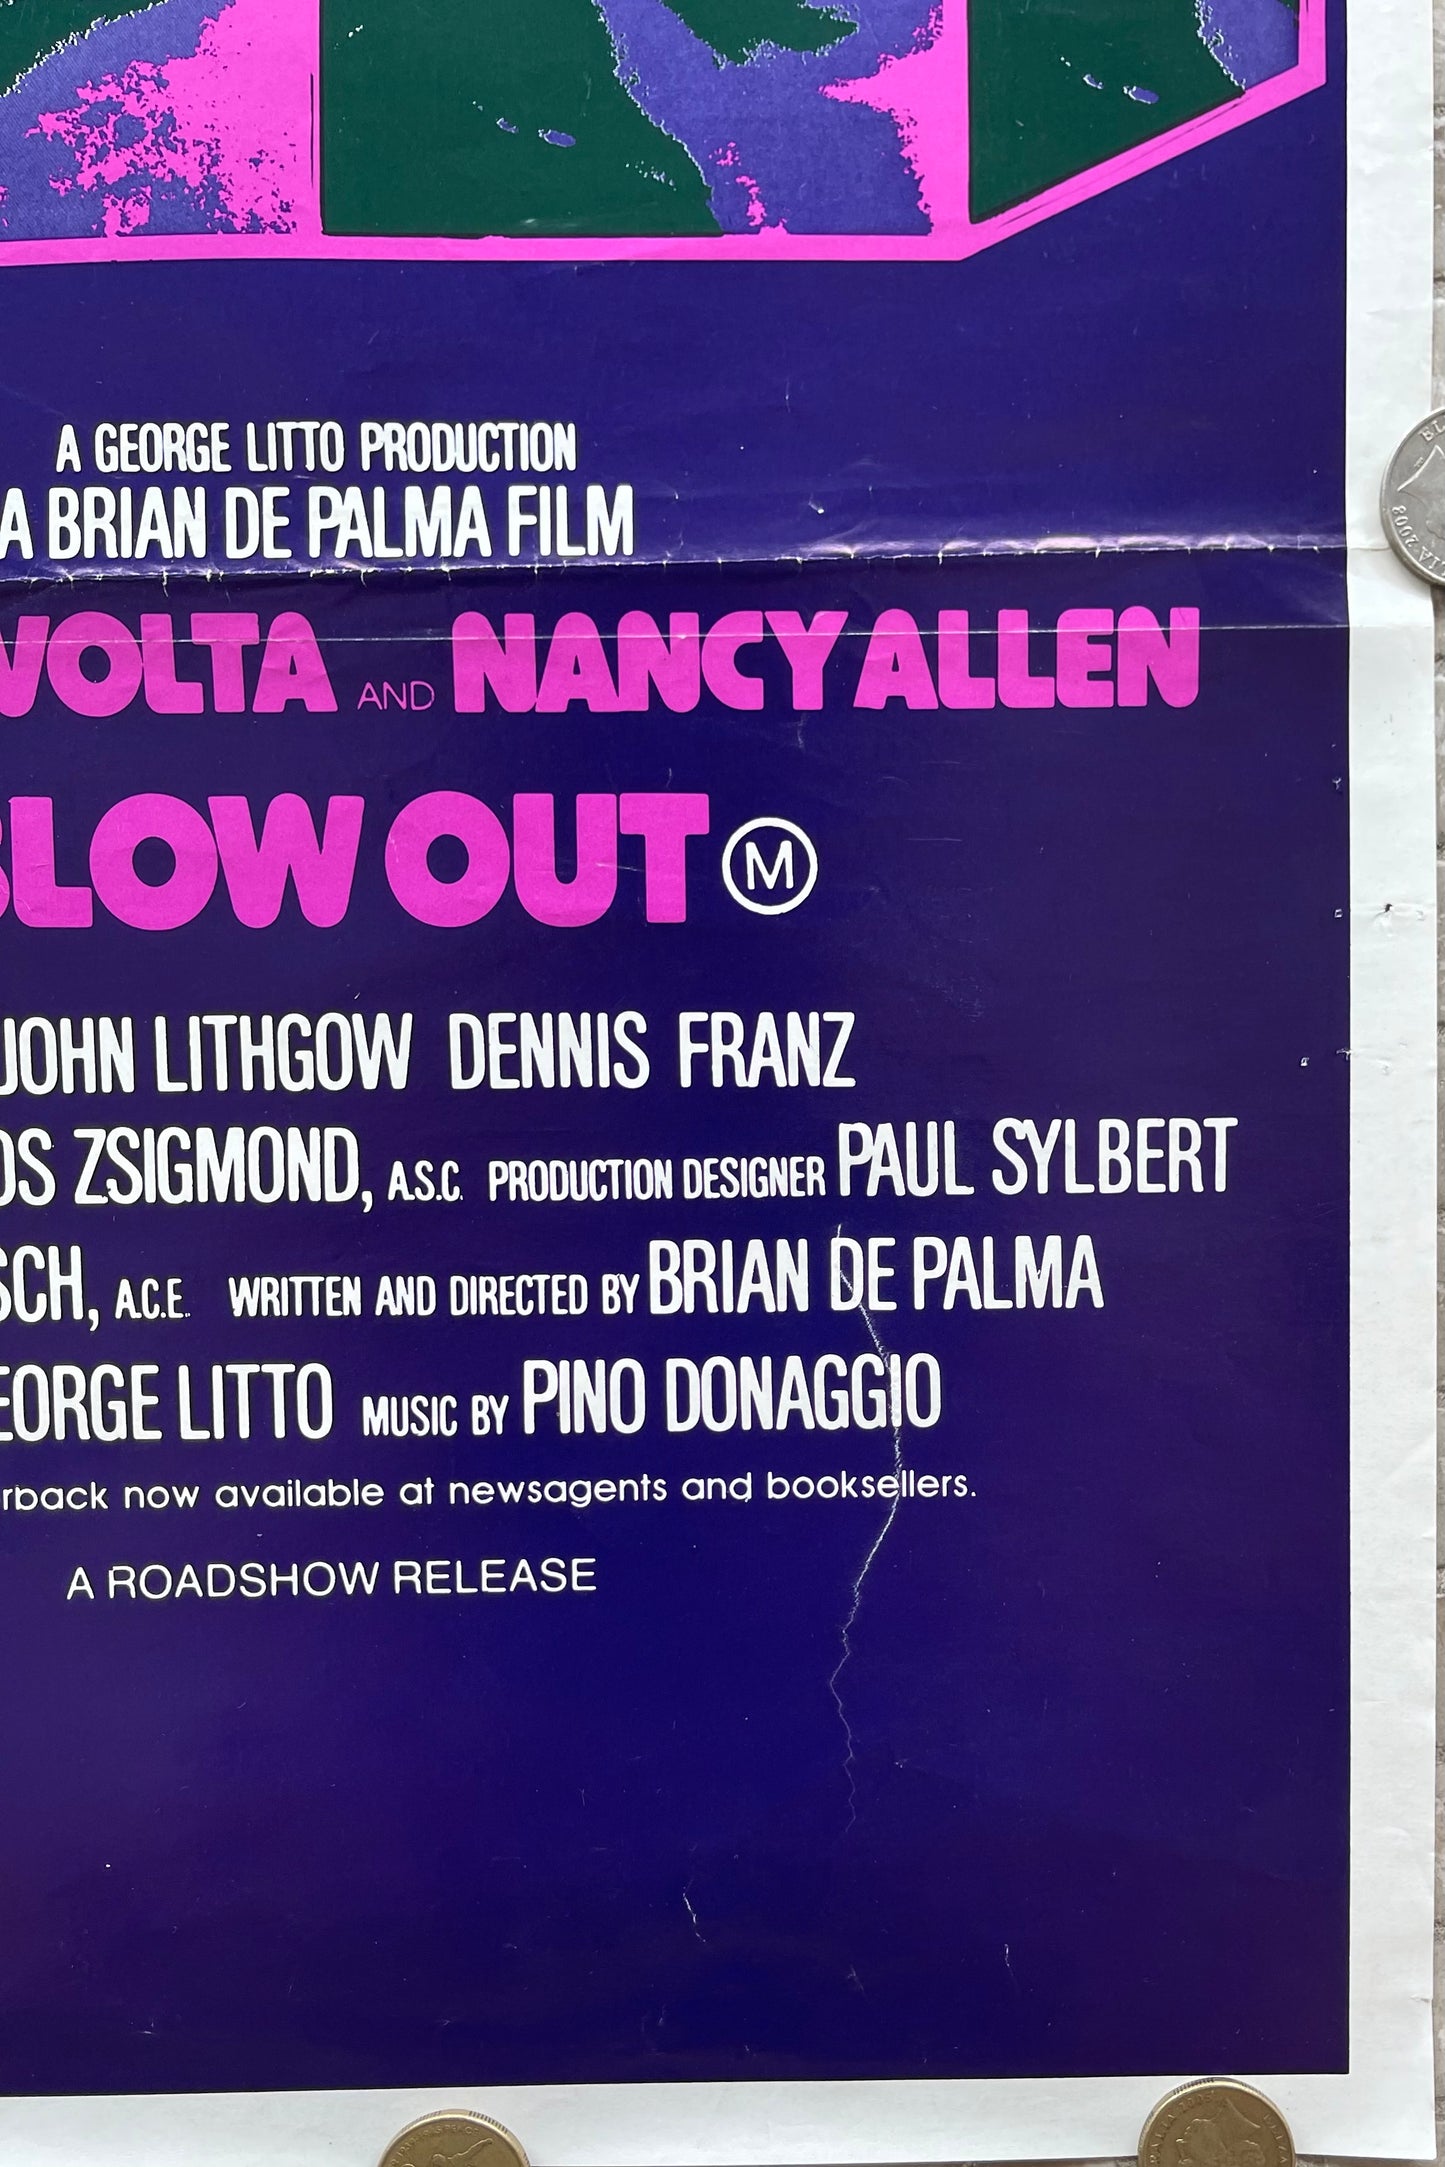 Blow Out (1981) - Daybill